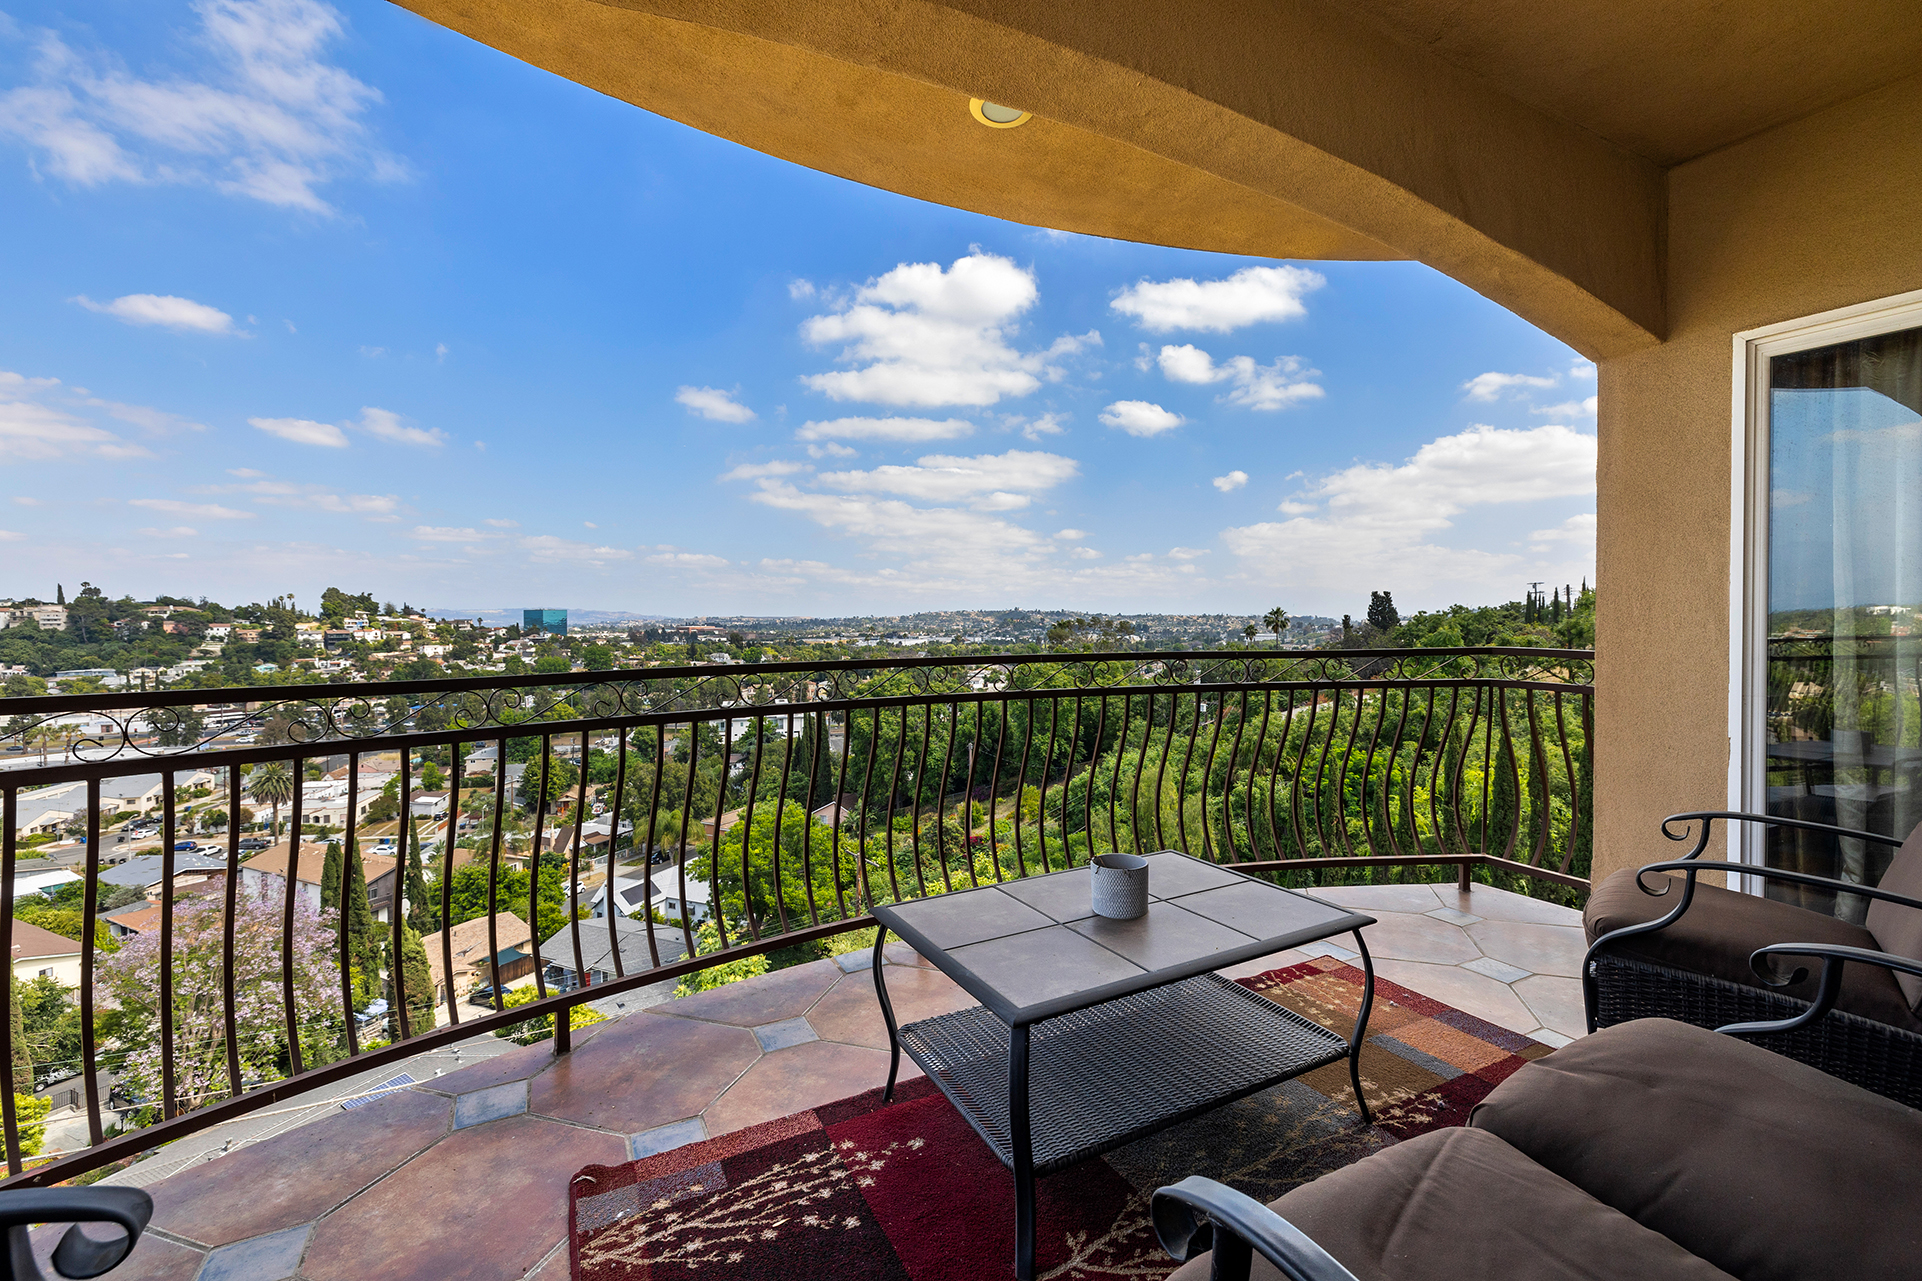 Daytime sweeping views of Northeast Los Angeles from the patio deck. El Sereno Hideaway Home For Sale